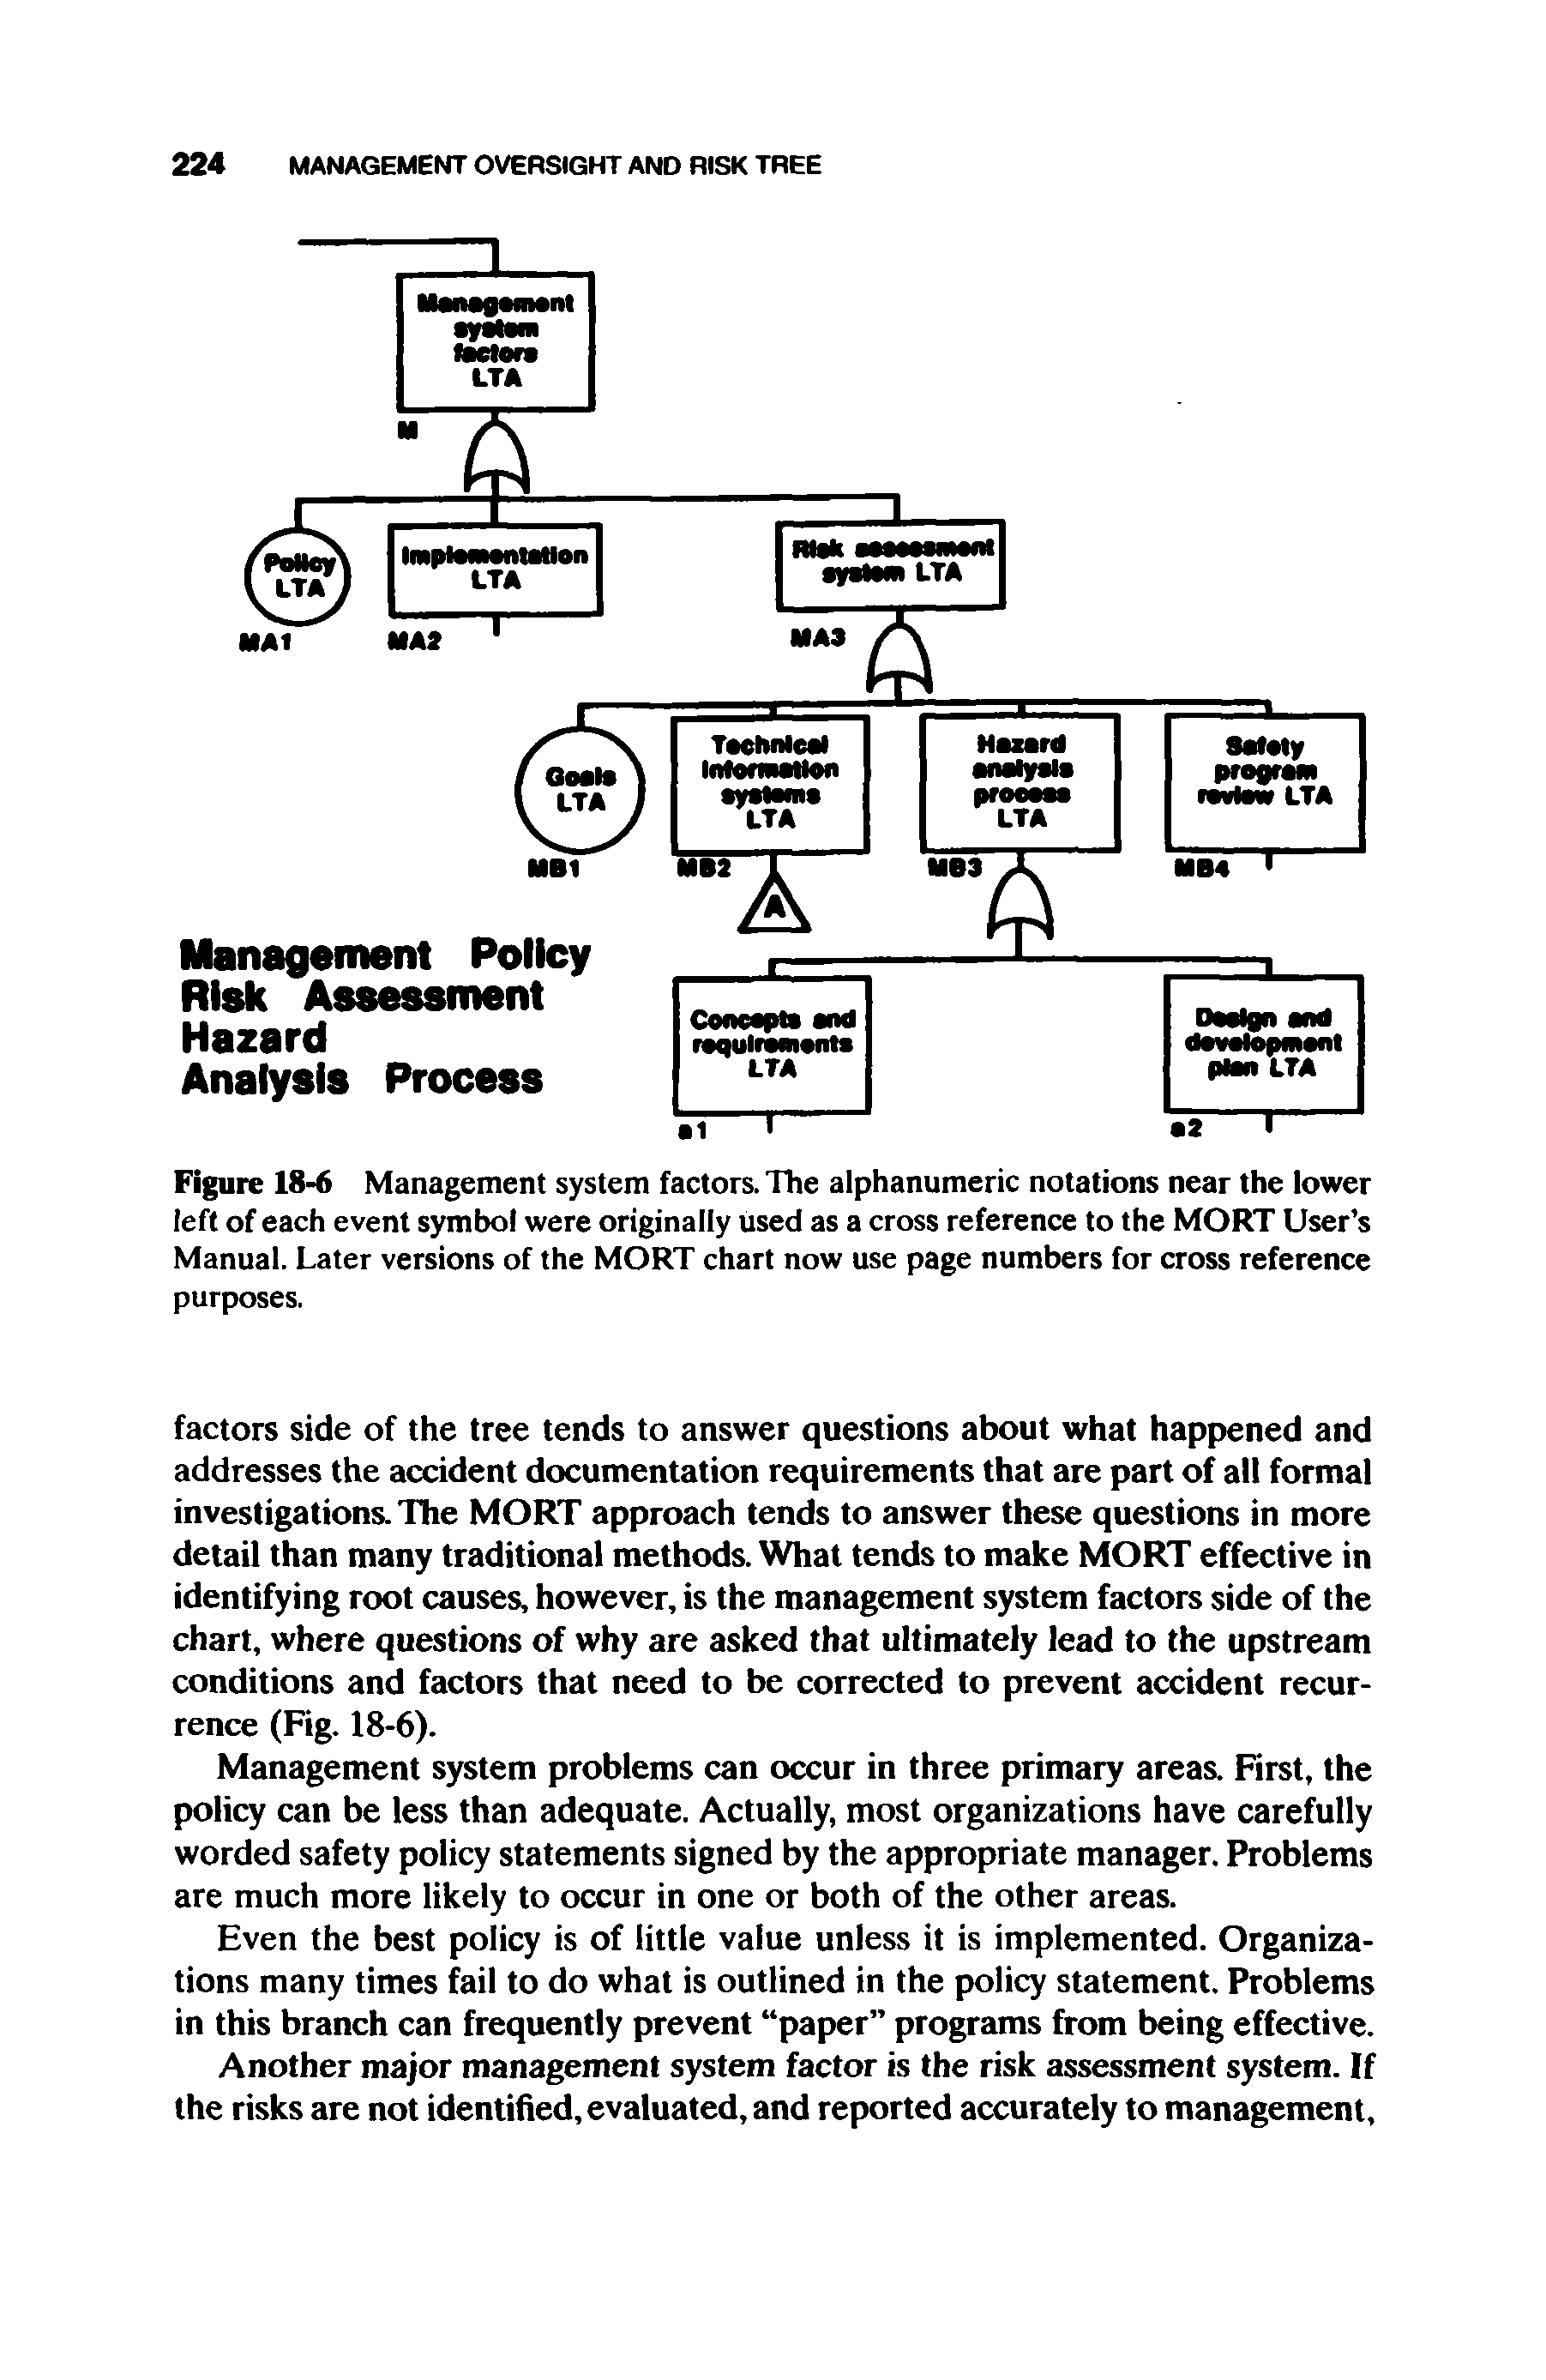 Figure 18-6 Management system factors. The alphanumeric notations near the lower left of each event symbol were originally used as a cross reference to the MORT User s Manual. Later versions of the MORT chart now use page numbers for cross reference purposes.